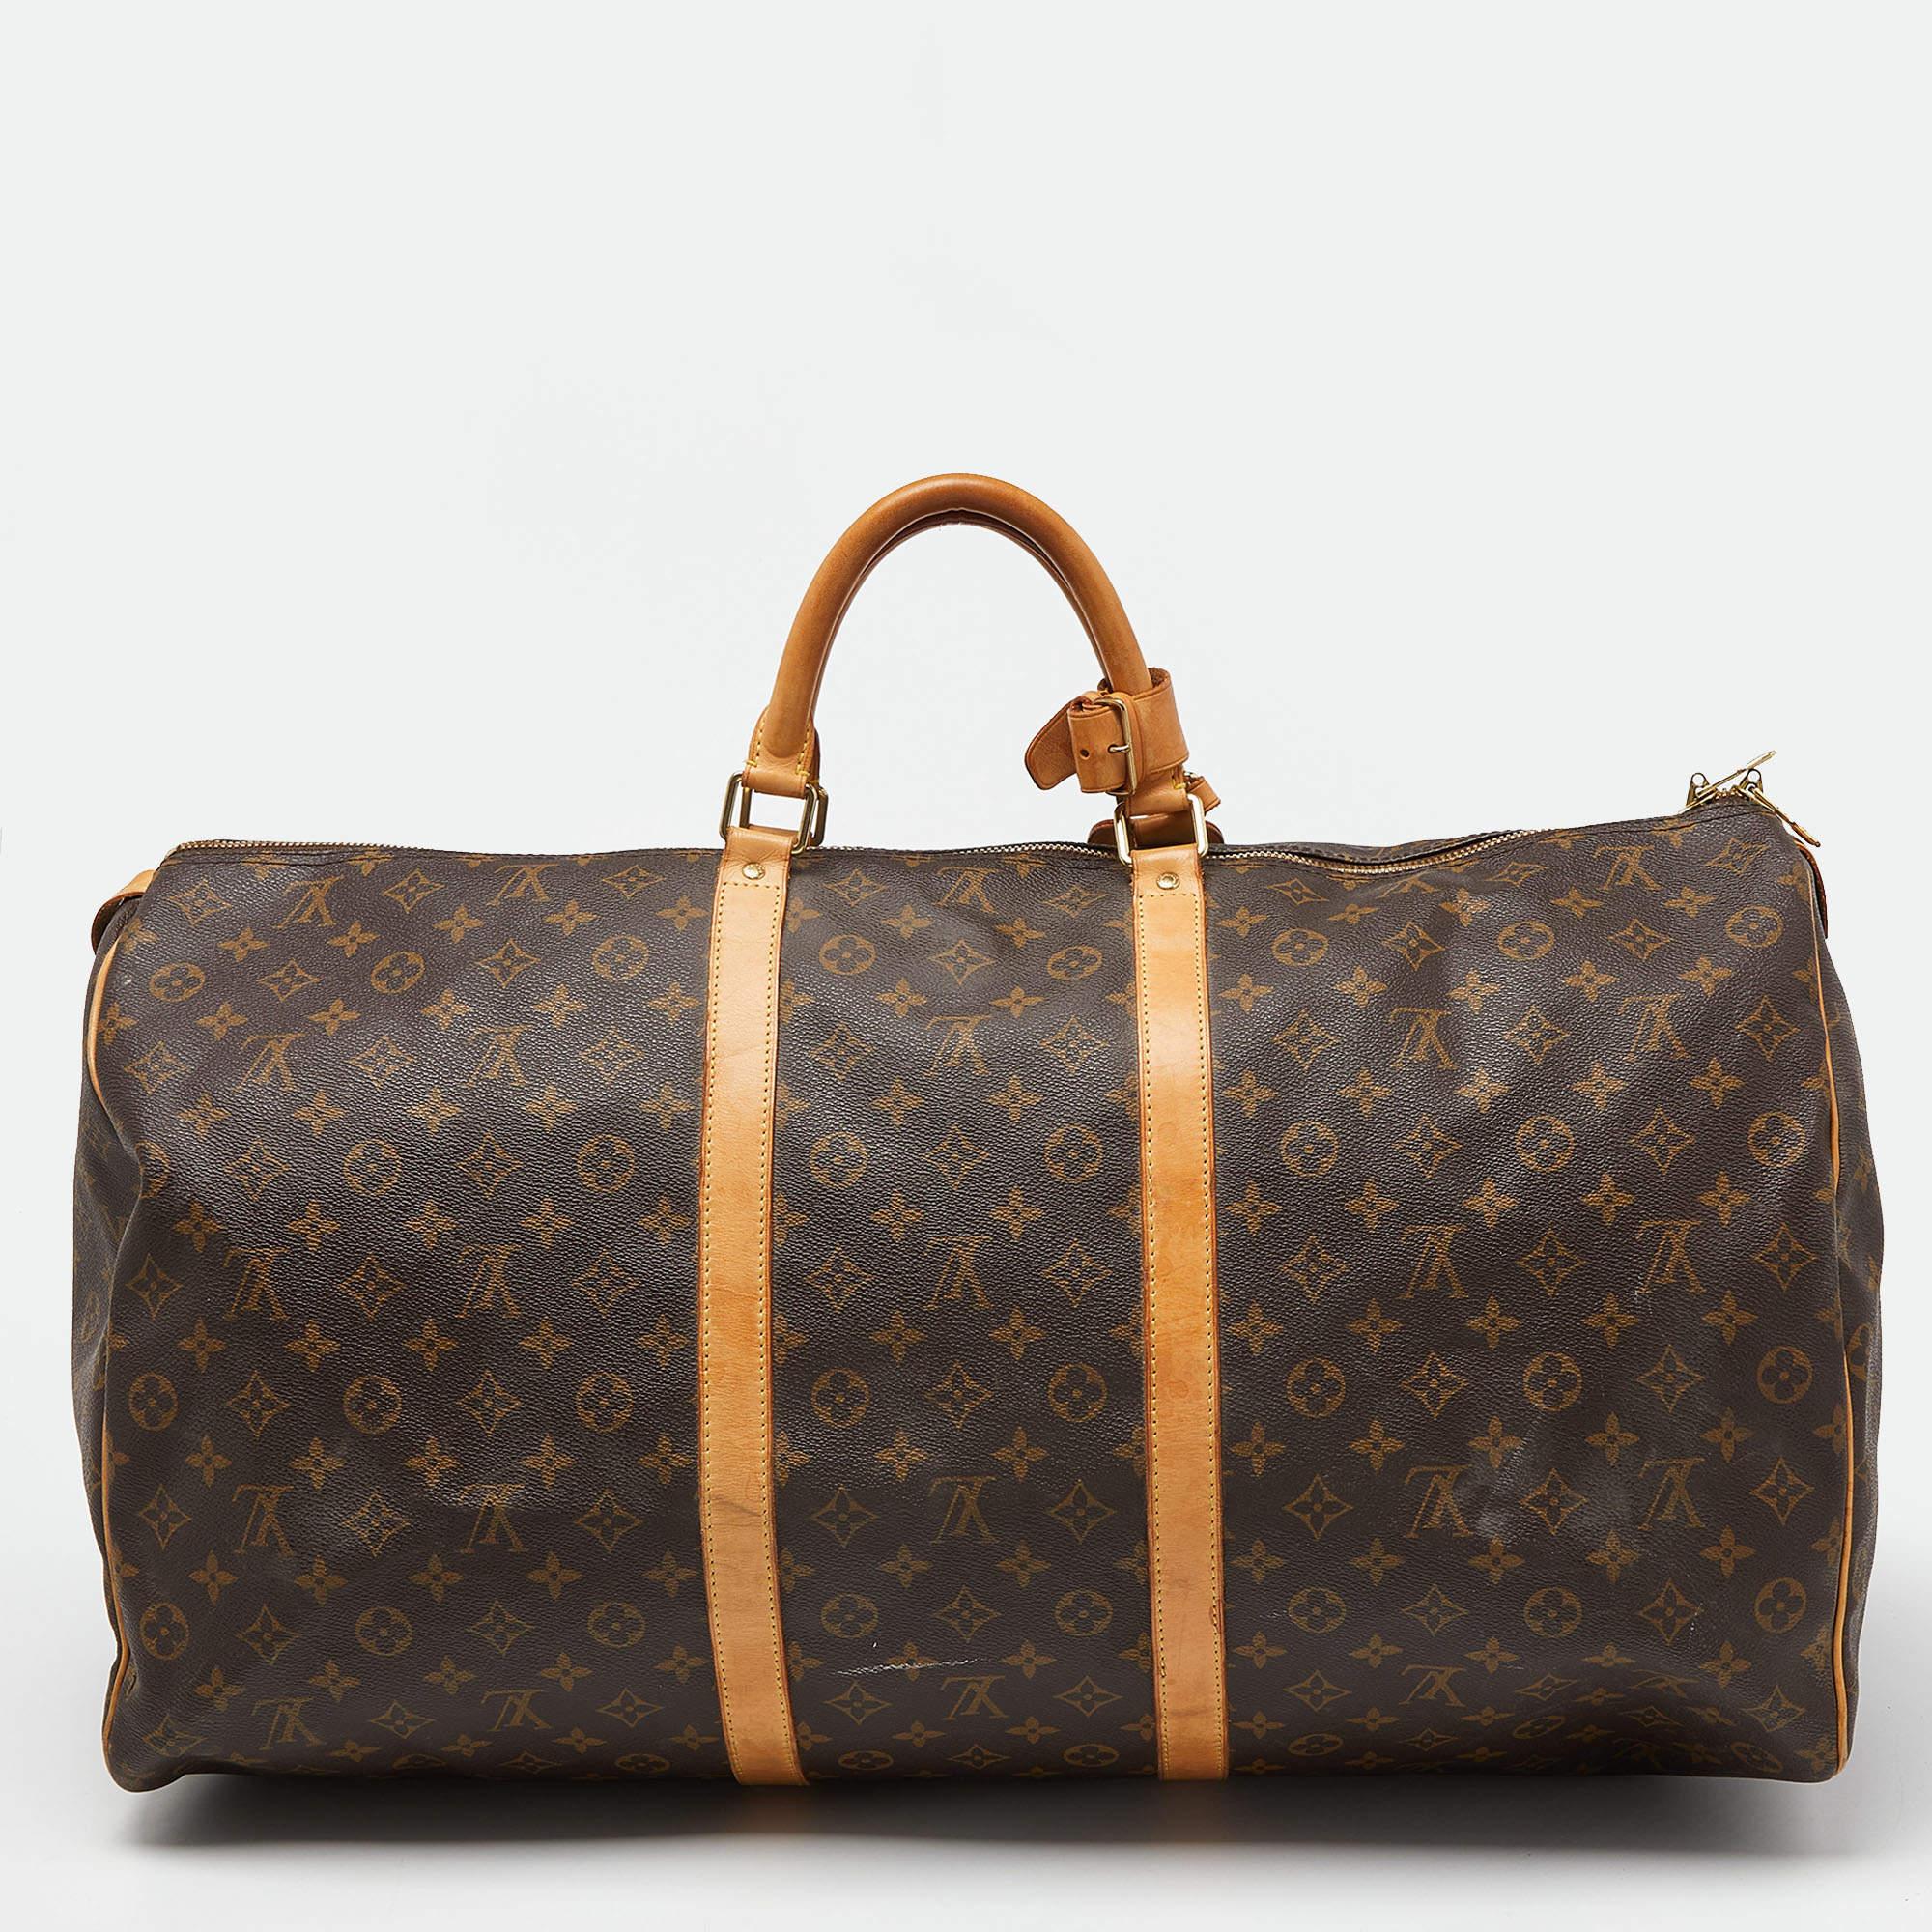 Travel to the places your heart desires with this authentic Louis Vuitton Keepall Bandouliere 60. It is made of high-grade materials in a spacious size.

Includes: Name Tag